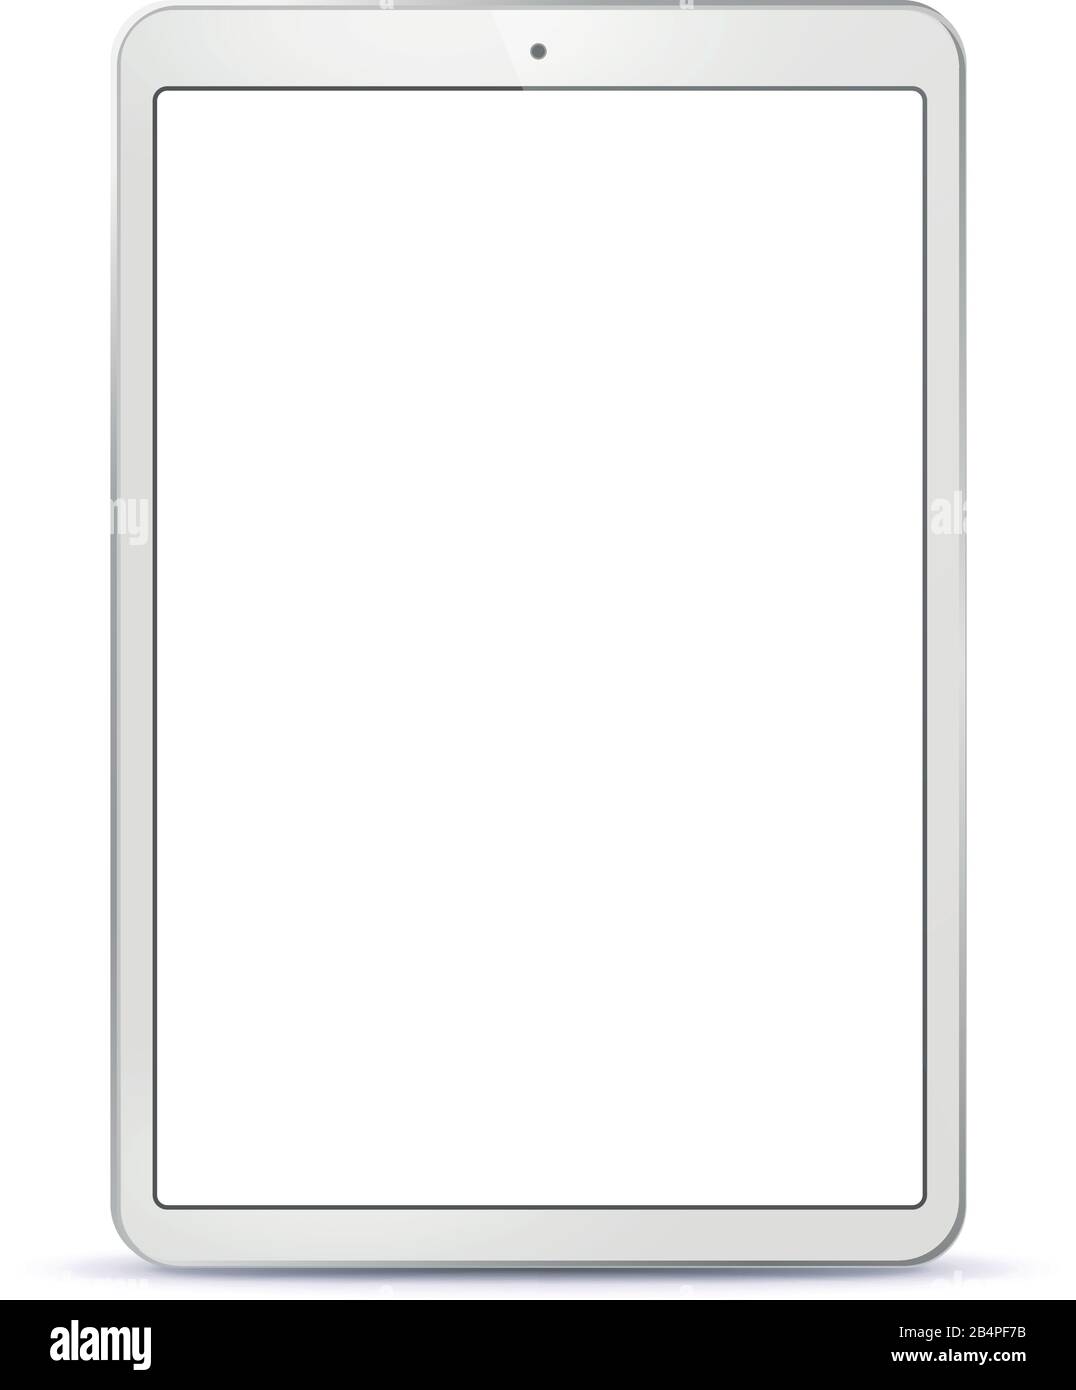 White Tablet Computer With Blank Screen Vector Illustration Stock Vector